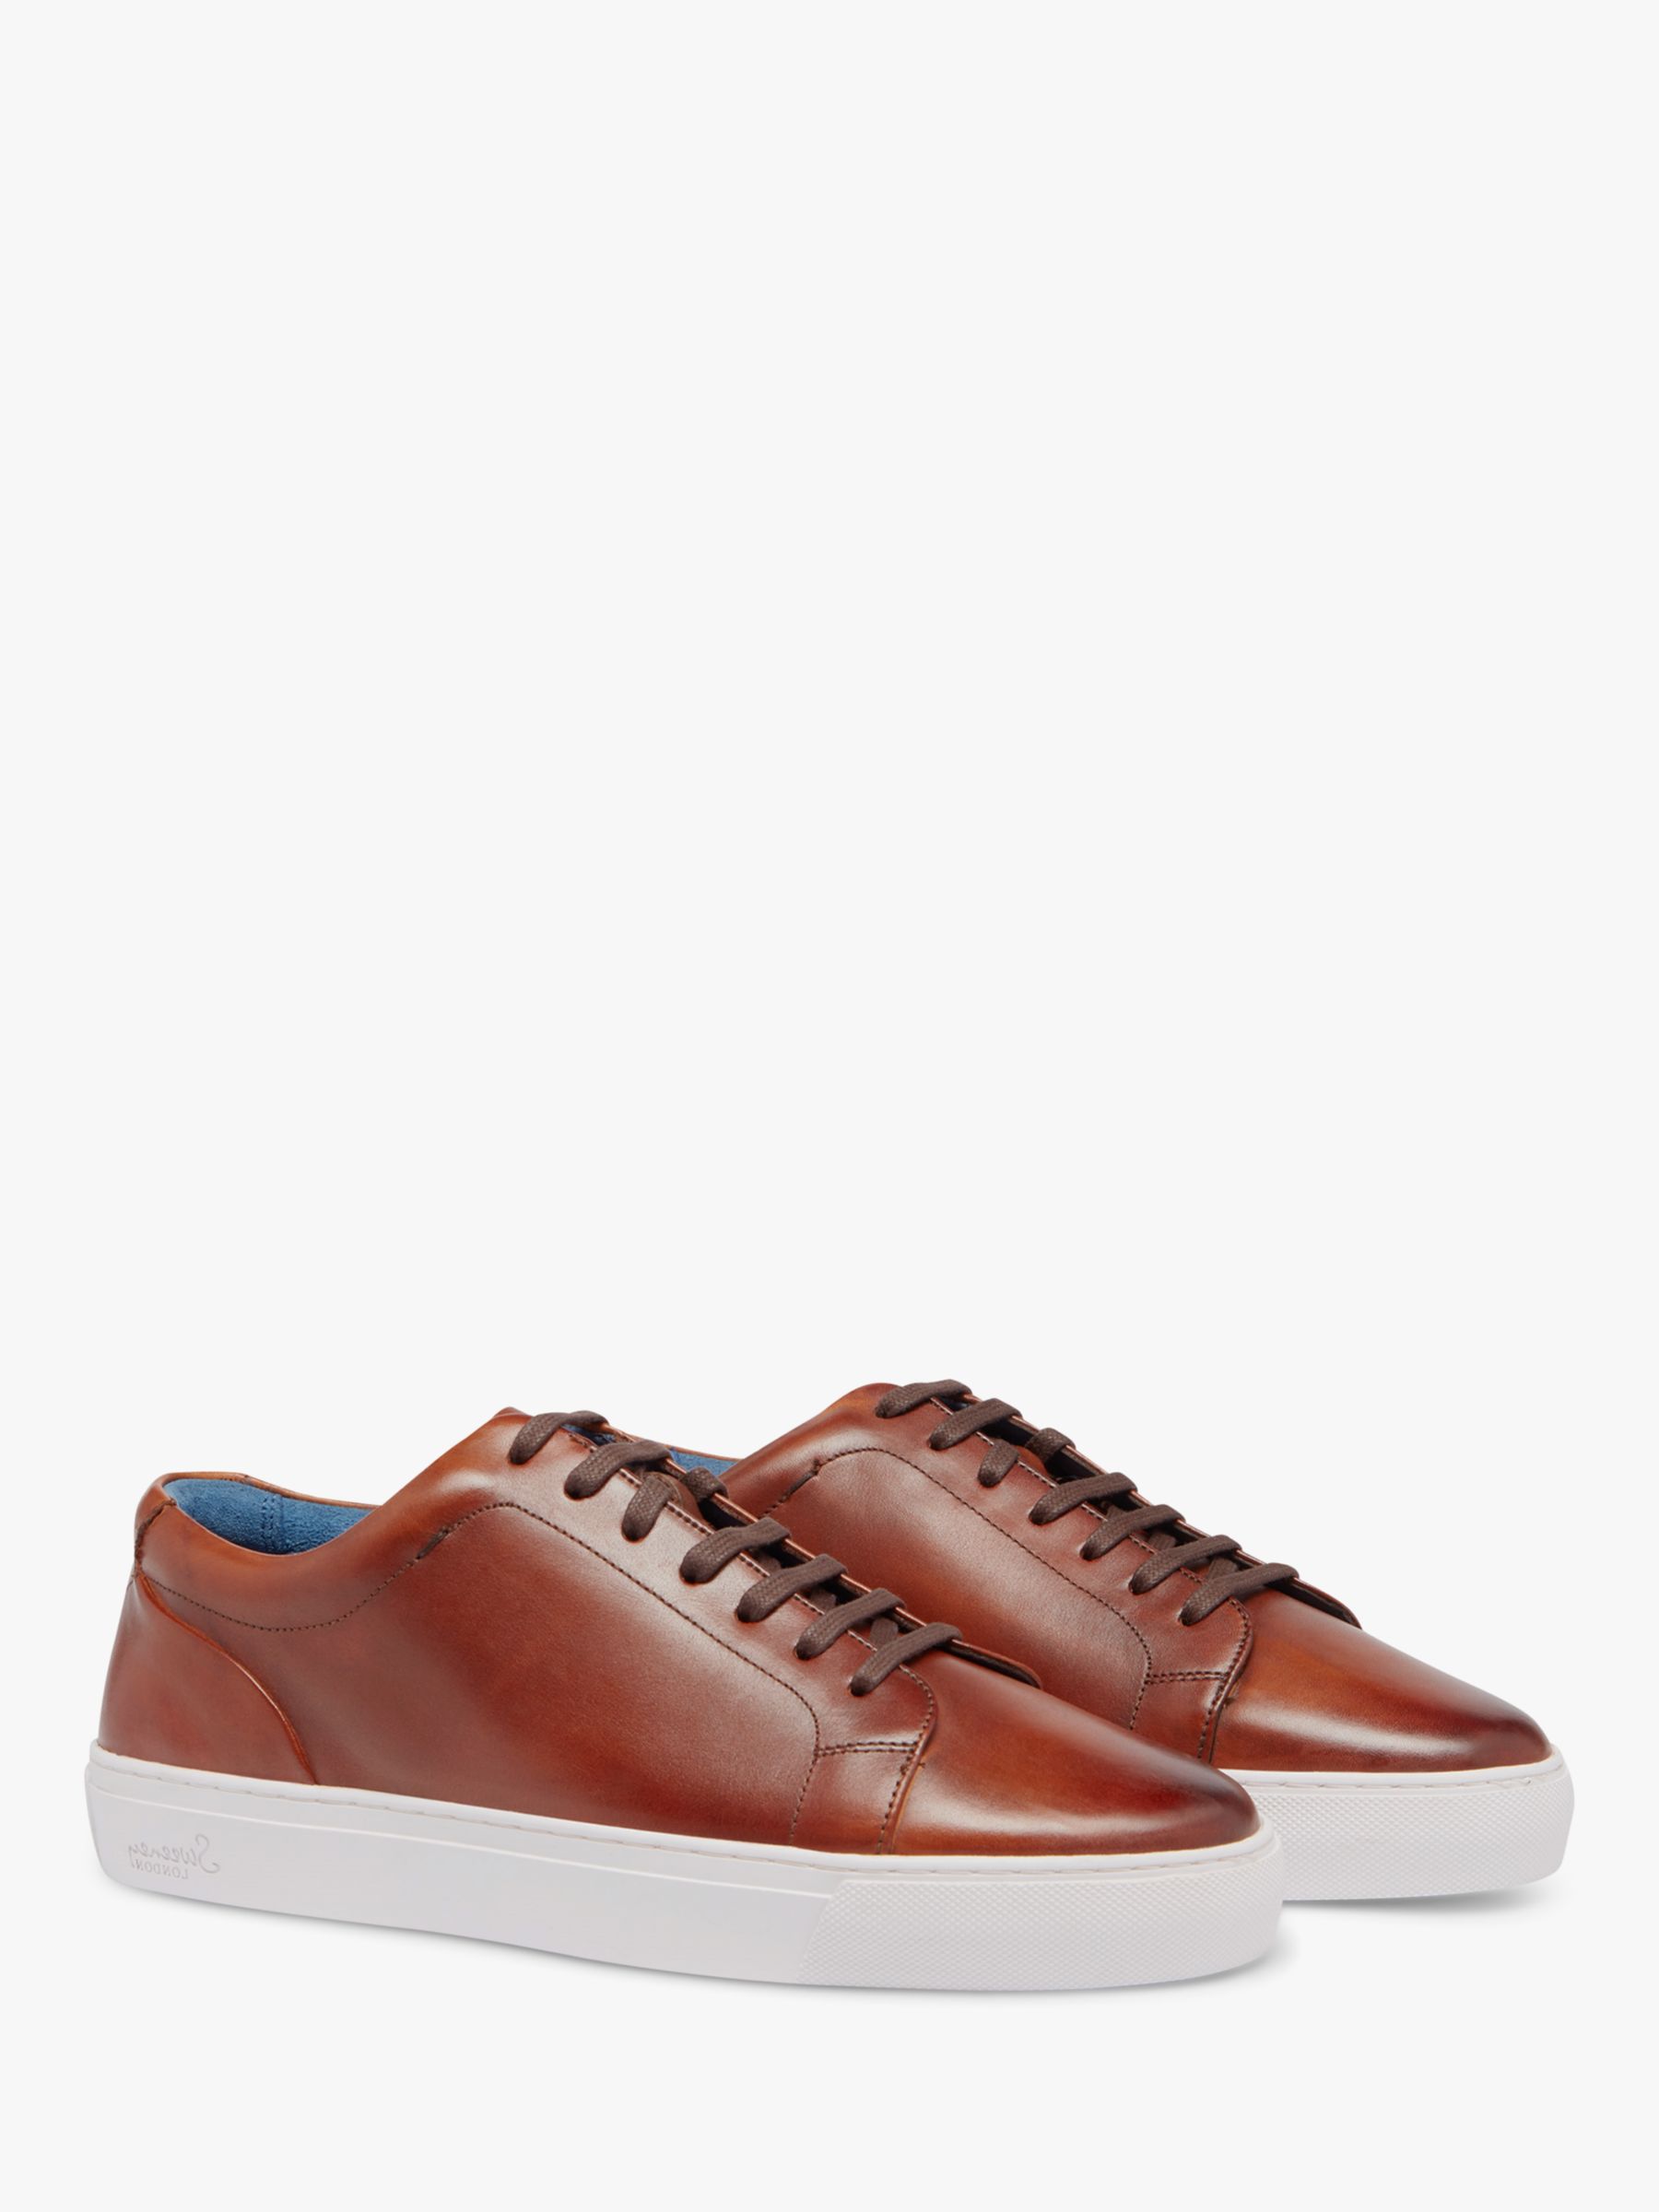 Oliver Sweeney Hayle Leather Trainers, Cognac, 7